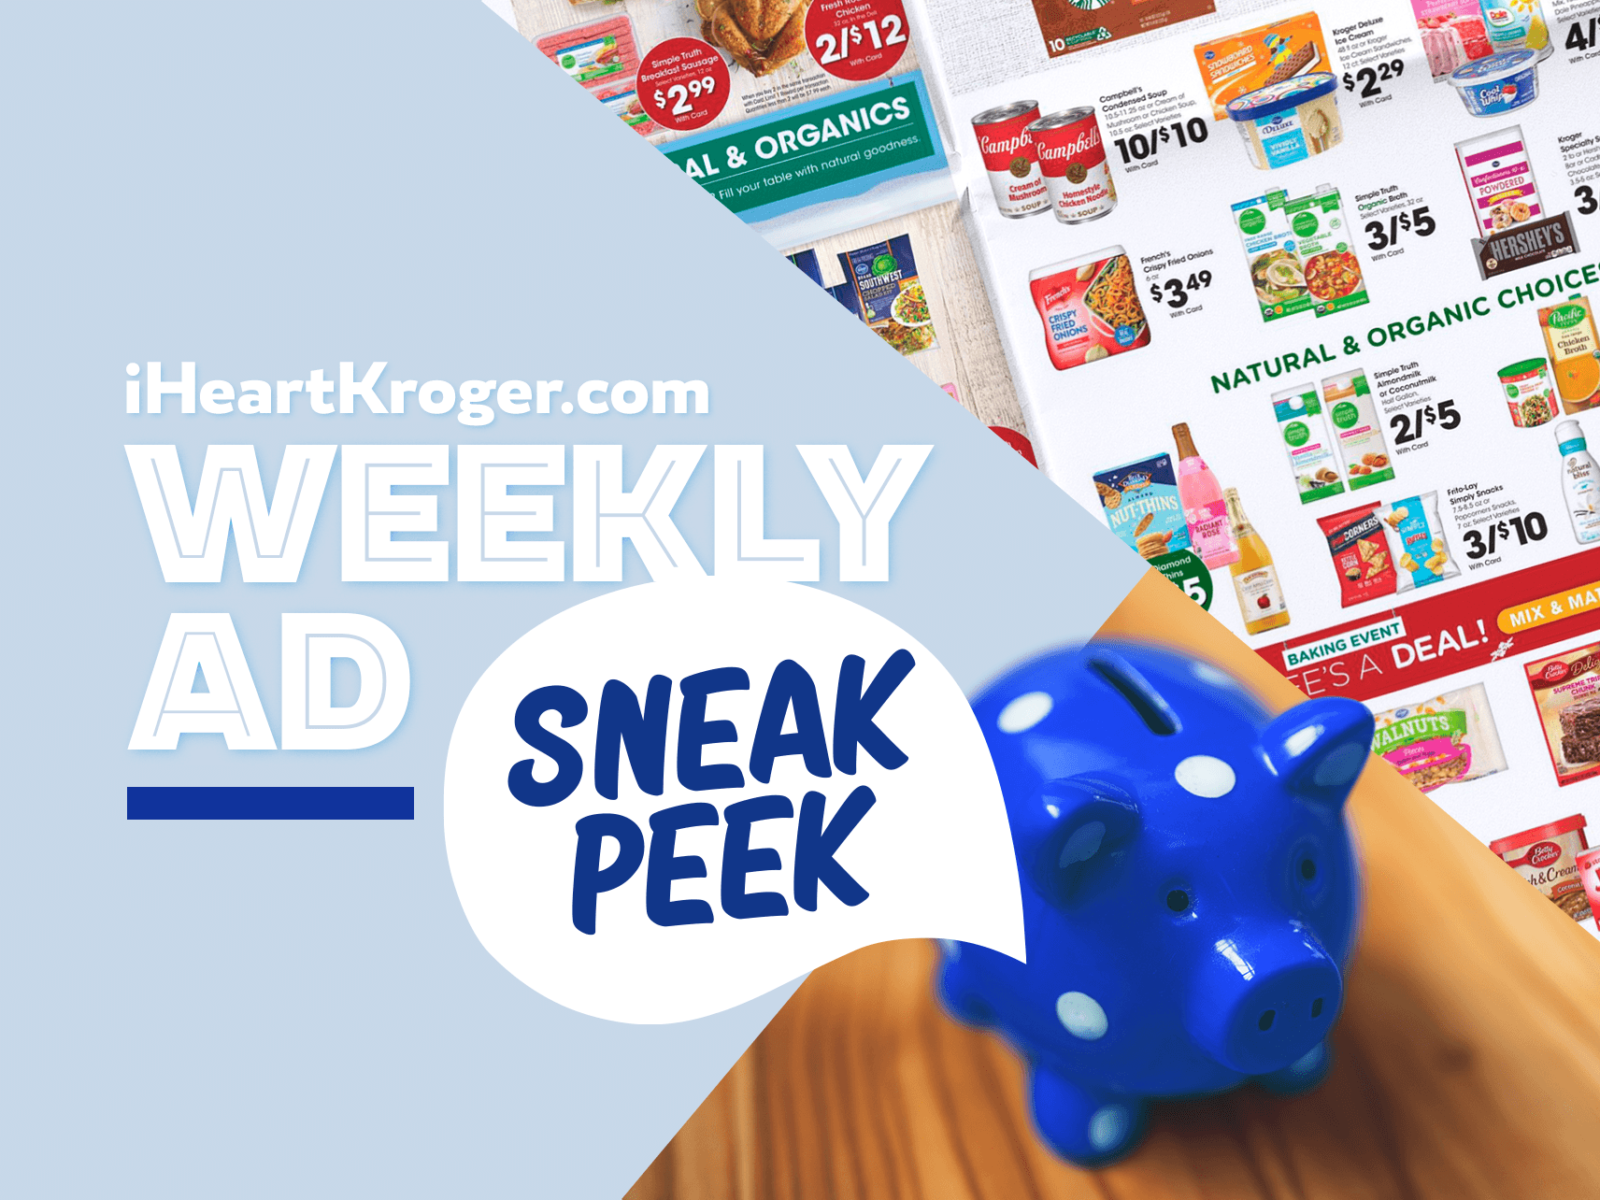 Kroger Ad & Coupons Week Of 3/15 to 3/21